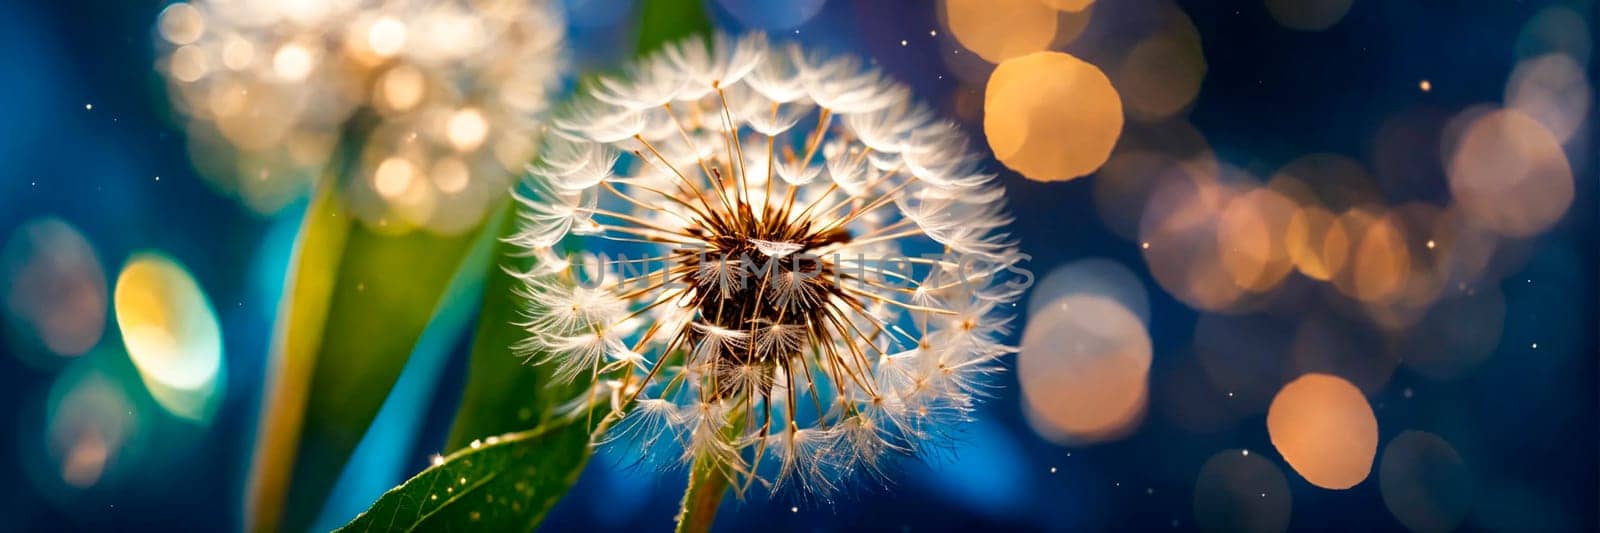 dandelion close-up in the field. Selective focus. by yanadjana